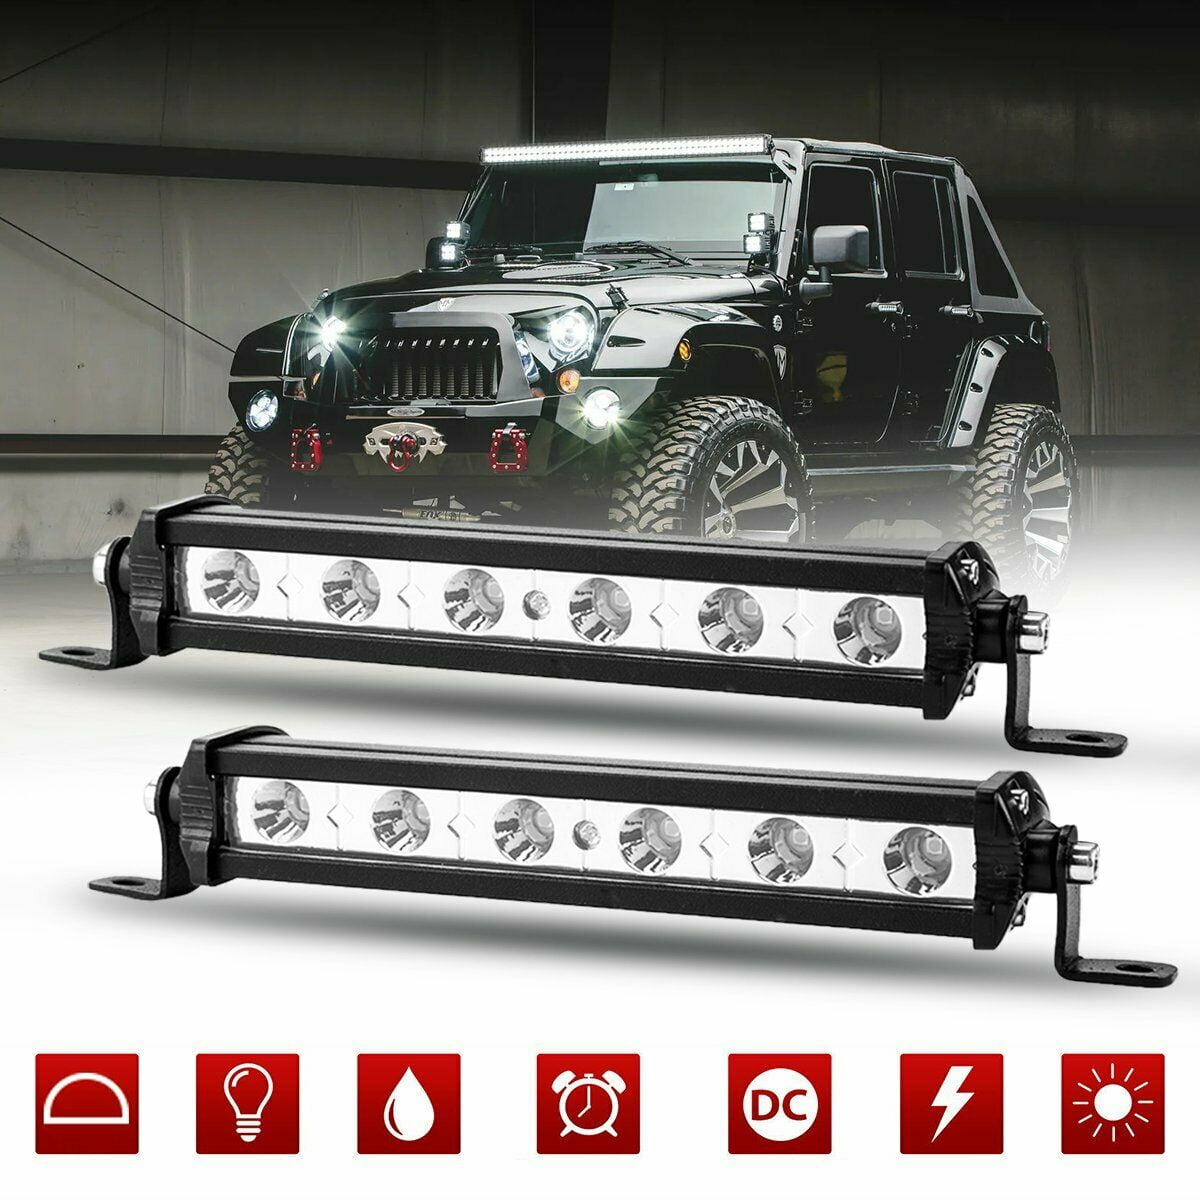 40 inch LED Light Bar Curved Road Truck Boat for Ford Jeep SUV 4WD UTE 4x4 38 42